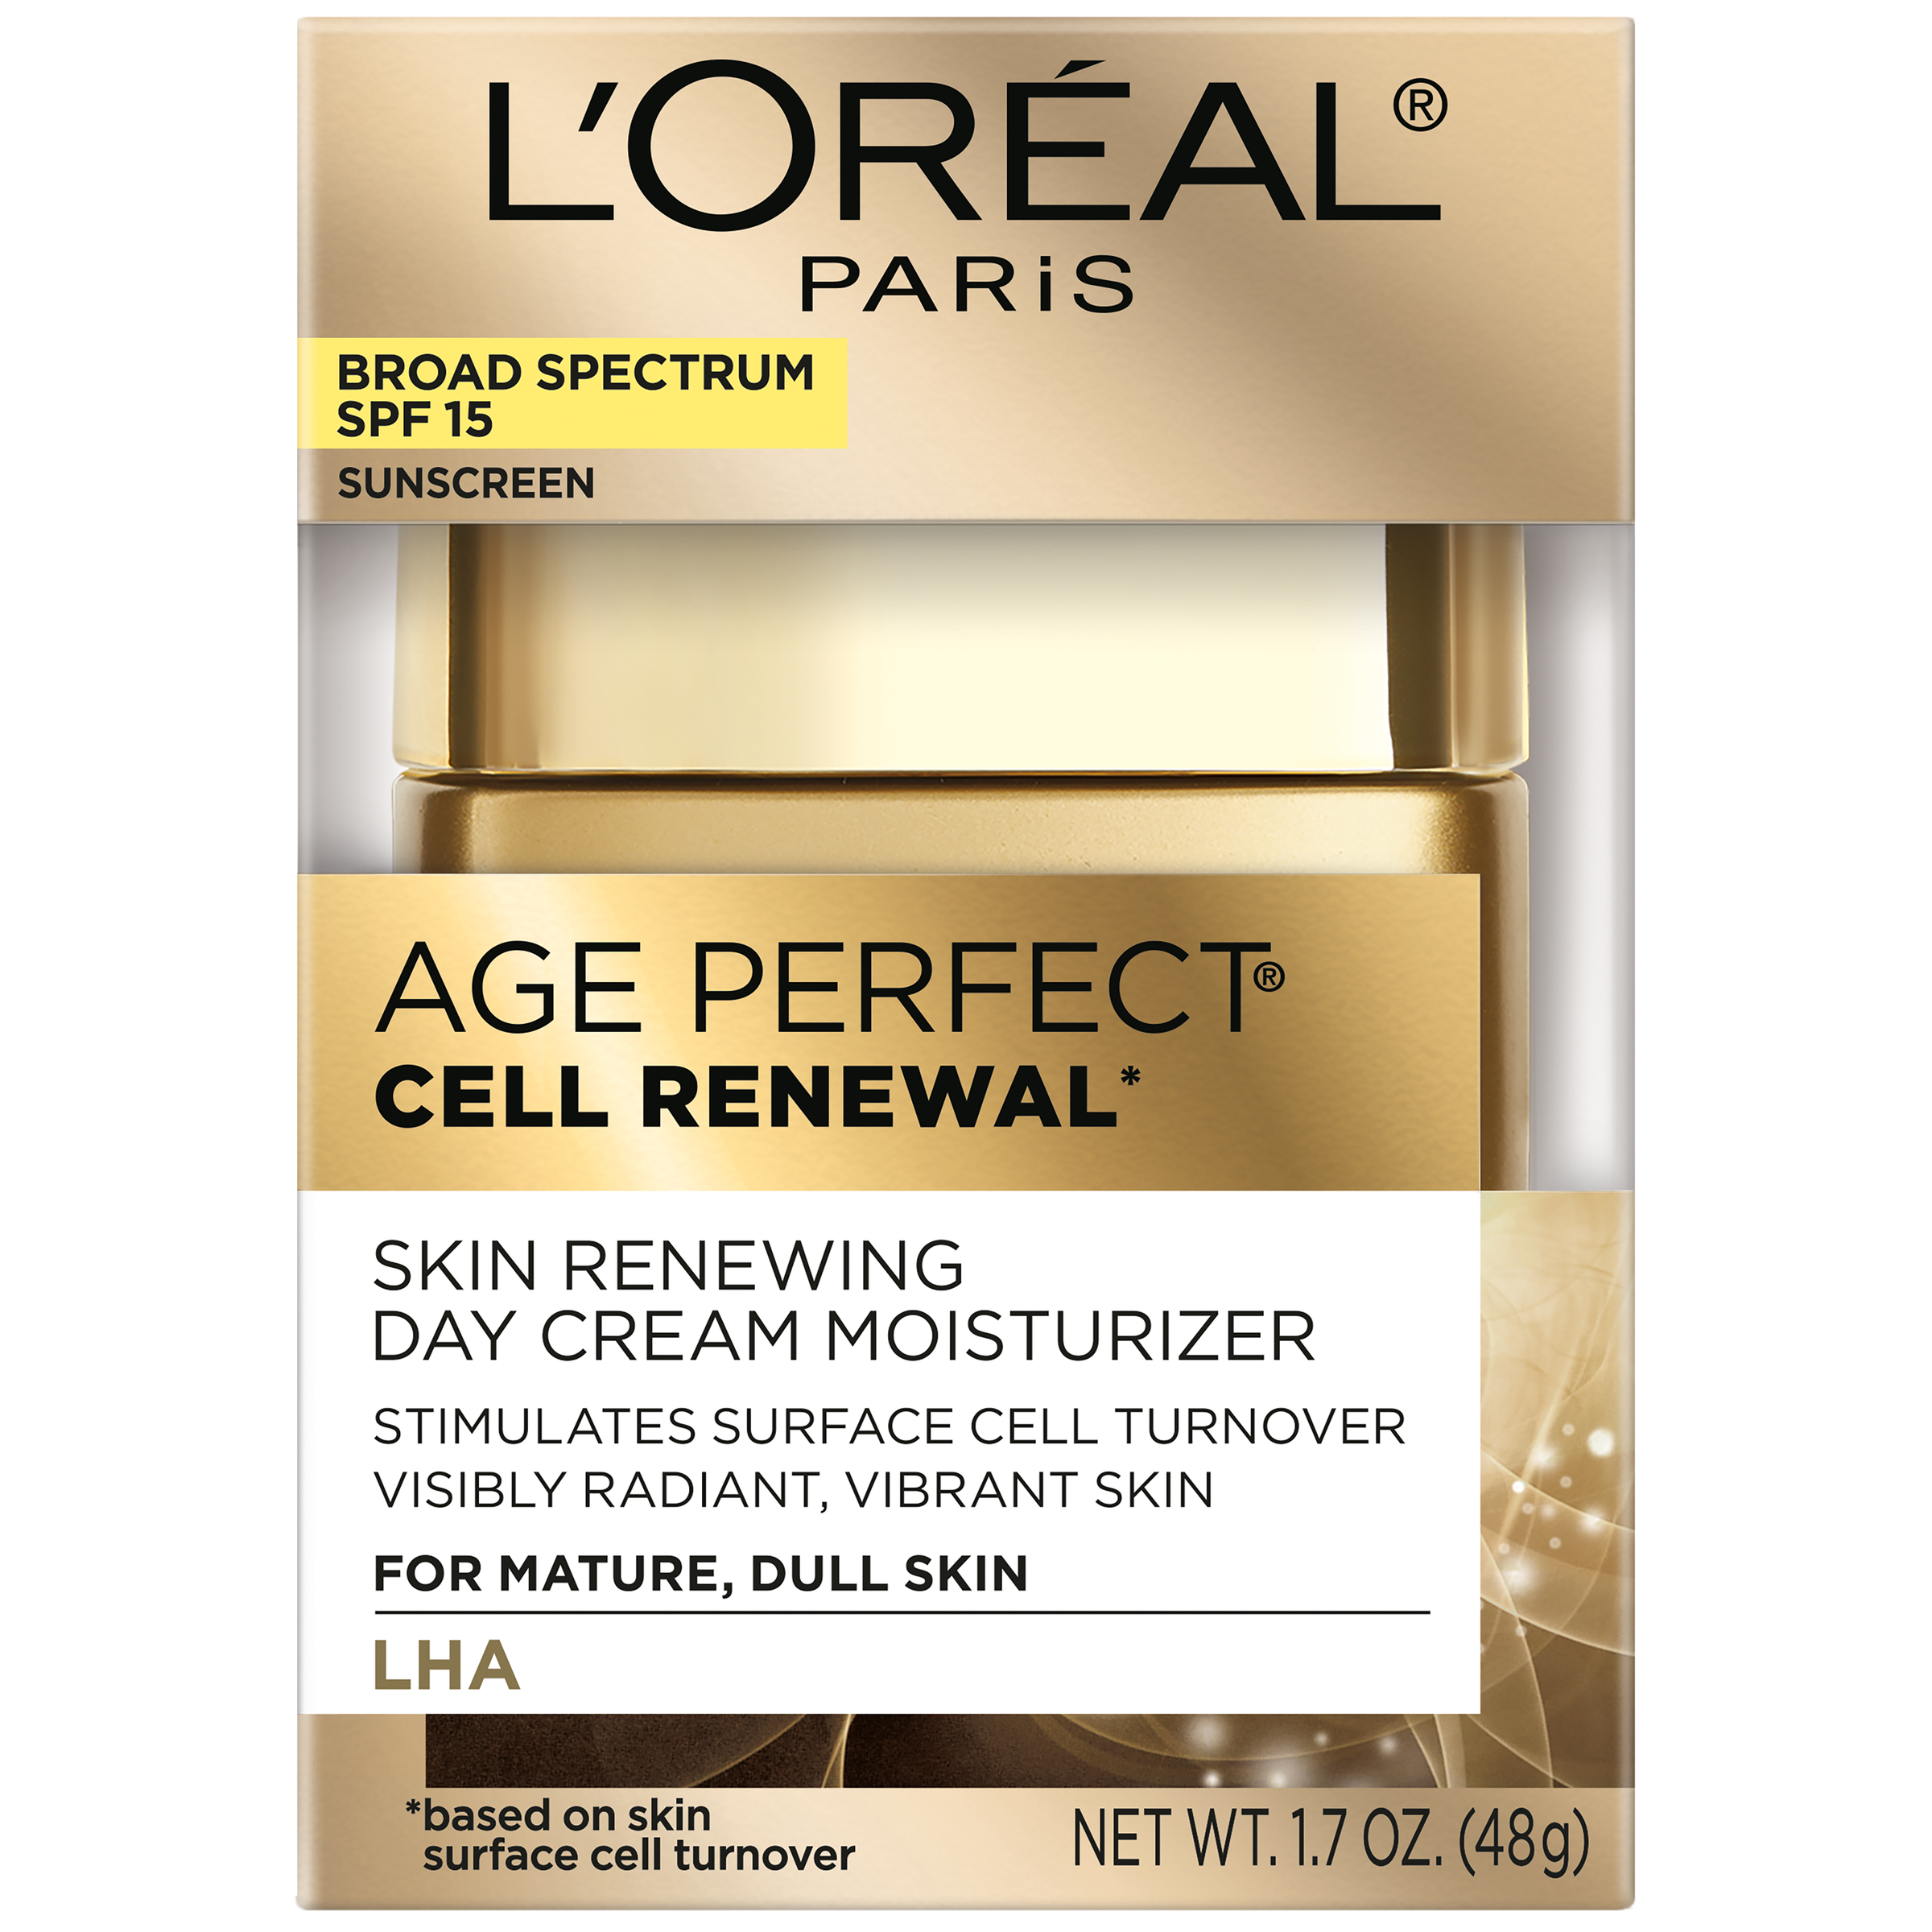 L'Oreal Paris Age Perfect Cell Renewal Day Cream Broad Spectrum SPF 15 Sunscreen, 1.7 oz - image 2 of 11